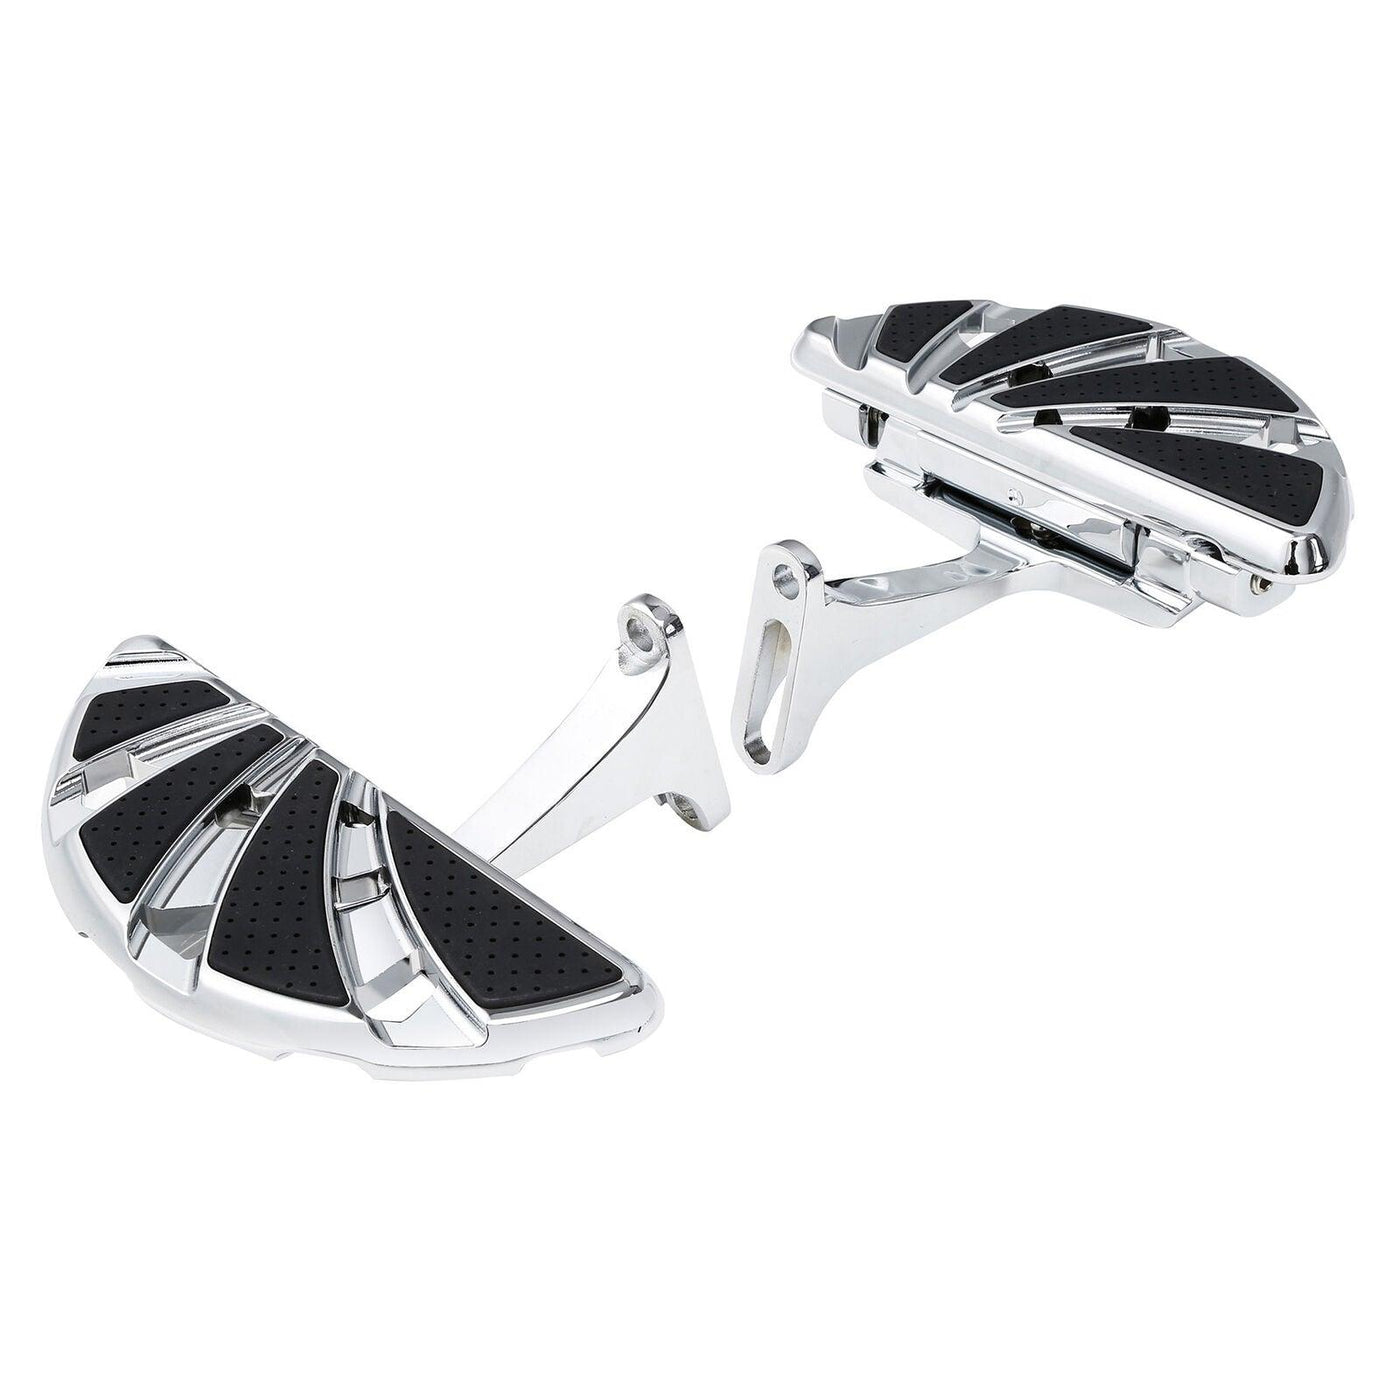 Rear Passenger Floorboard Foot board Fit For Harley Road Glide King 93-21 Chrome - Moto Life Products